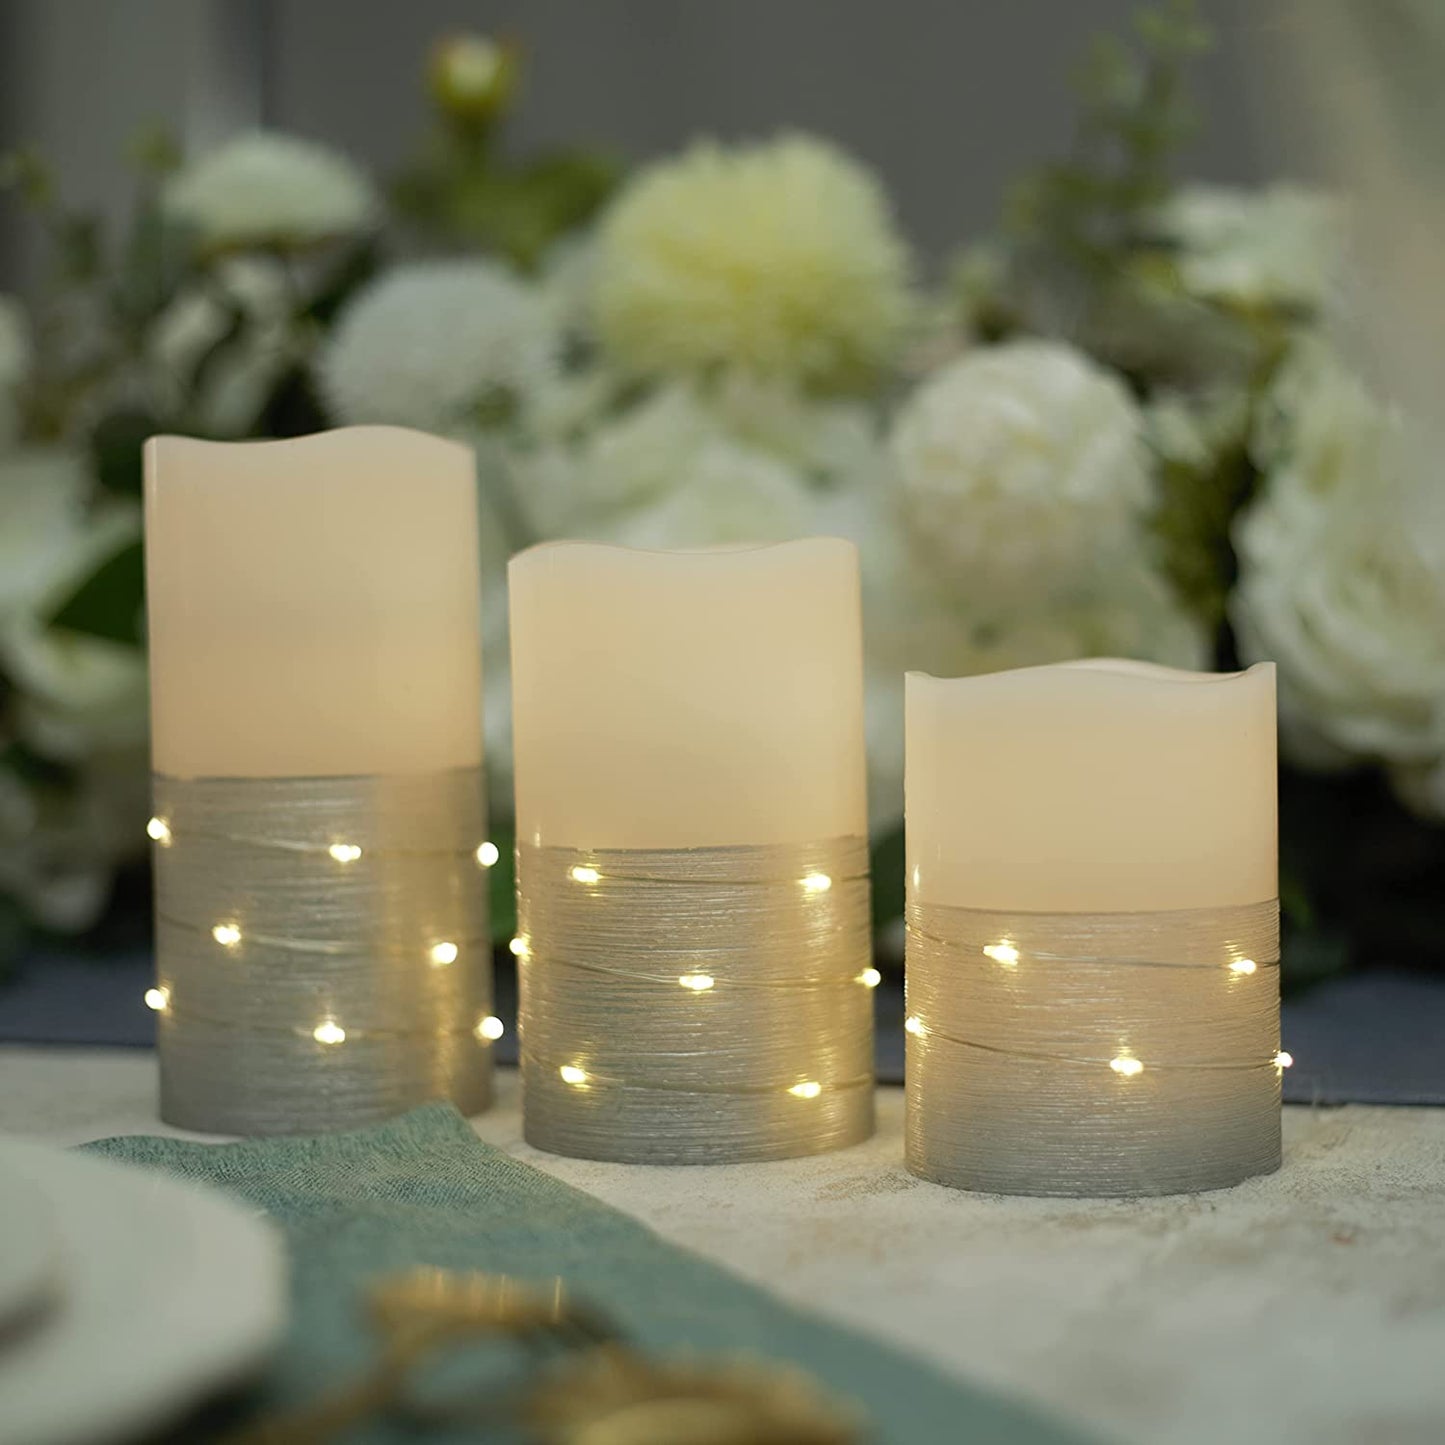 Flickering Flameless Candles Ivory Real Wax Pillar with Embedded String Lights H-BLOSSOM LED Candles Battery Operated with Cycling 5H Timer Set of 3 (3" x 4"/5"/6") (Ivory)